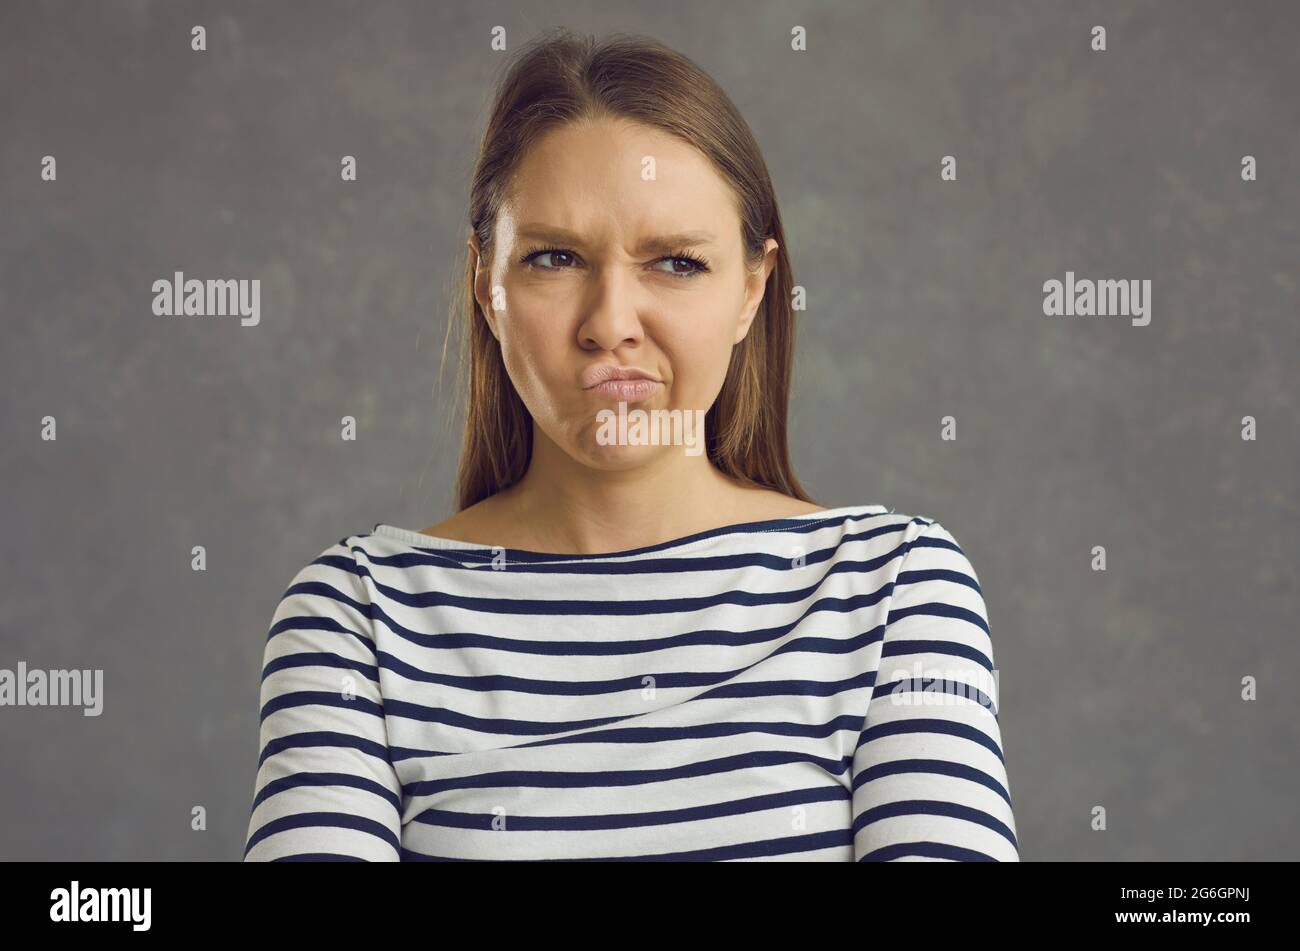 Portrait of young woman pouting lips and looking away with funny displeased face expression Stock Photo